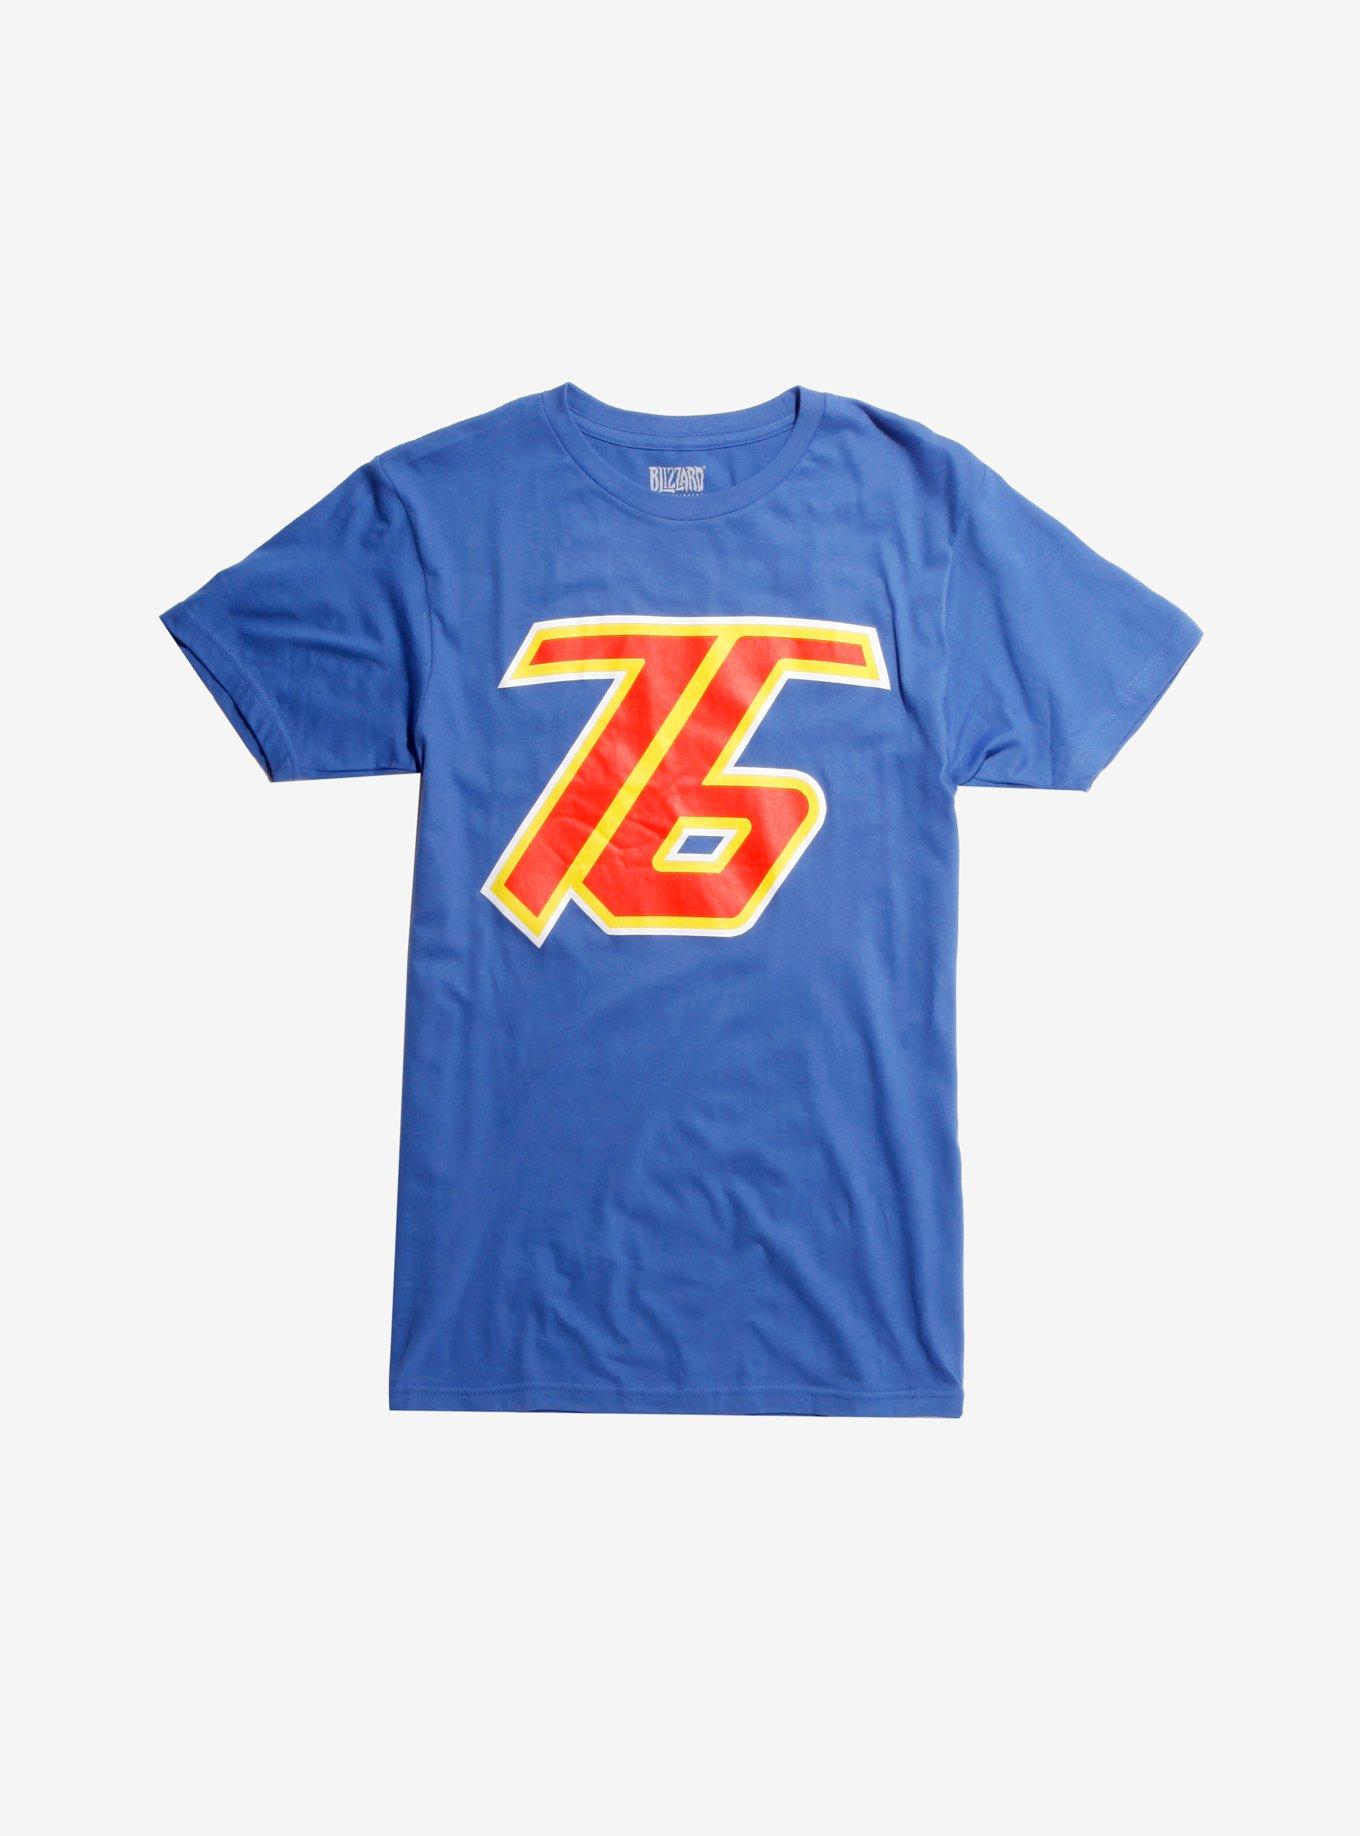 Overwatch Soldier: 76 Logo T-Shirt | Hot Topic